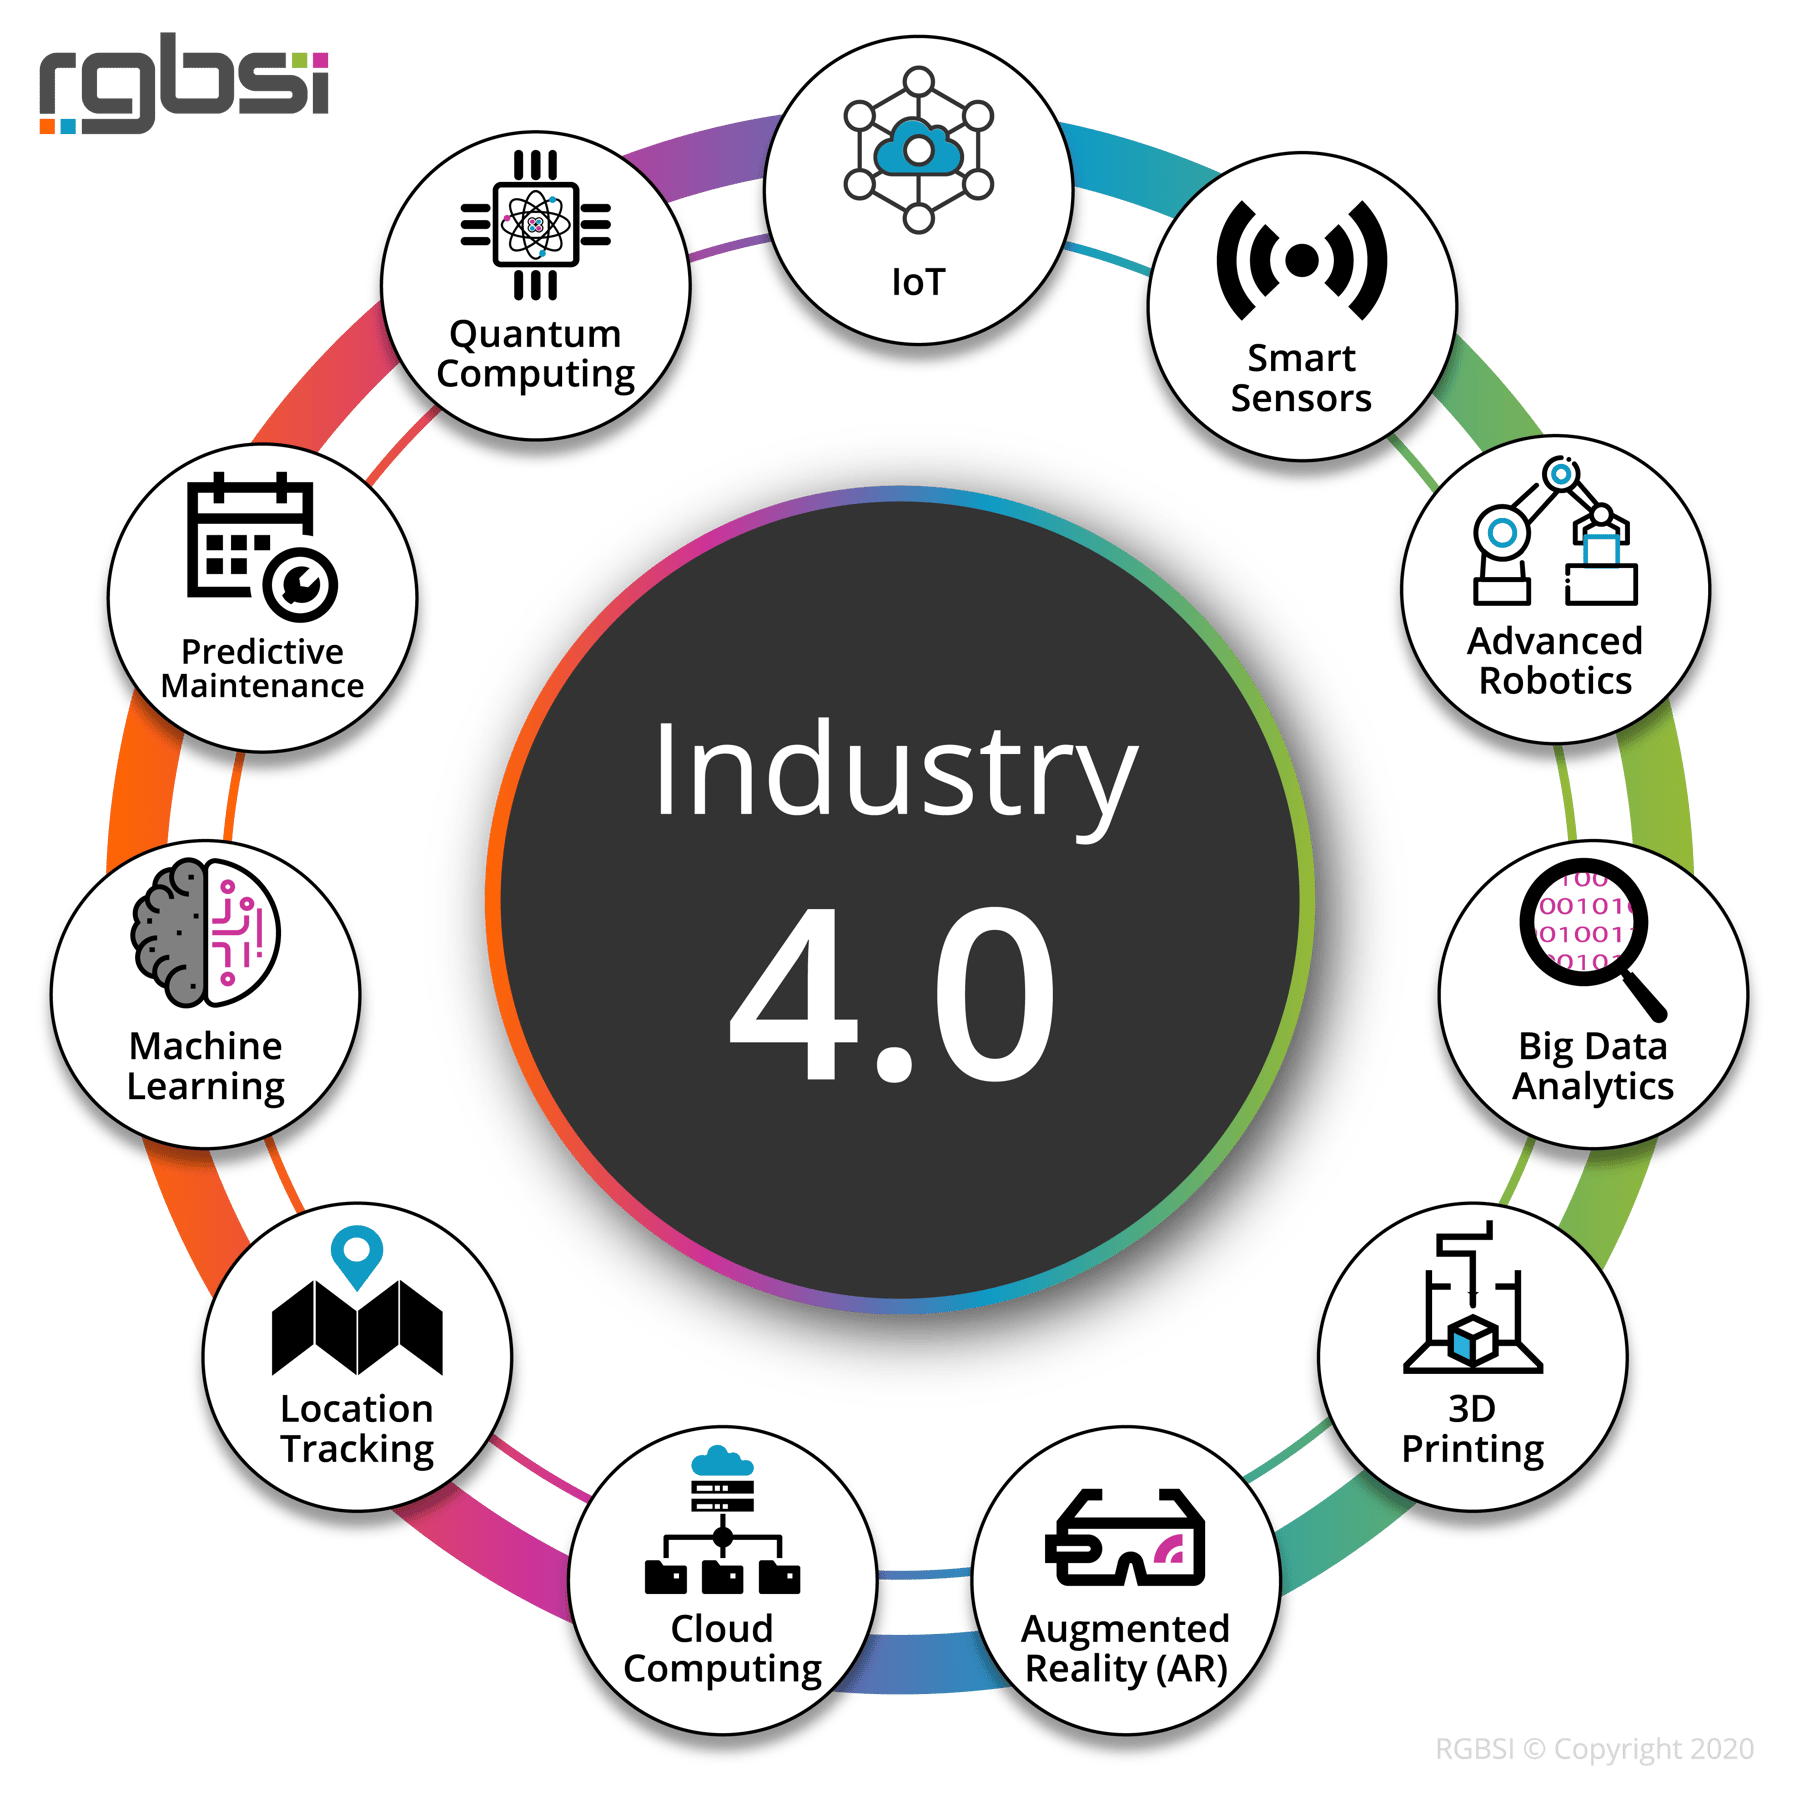 11 Simple Definitions to Help You Better Understand Industry 4.0